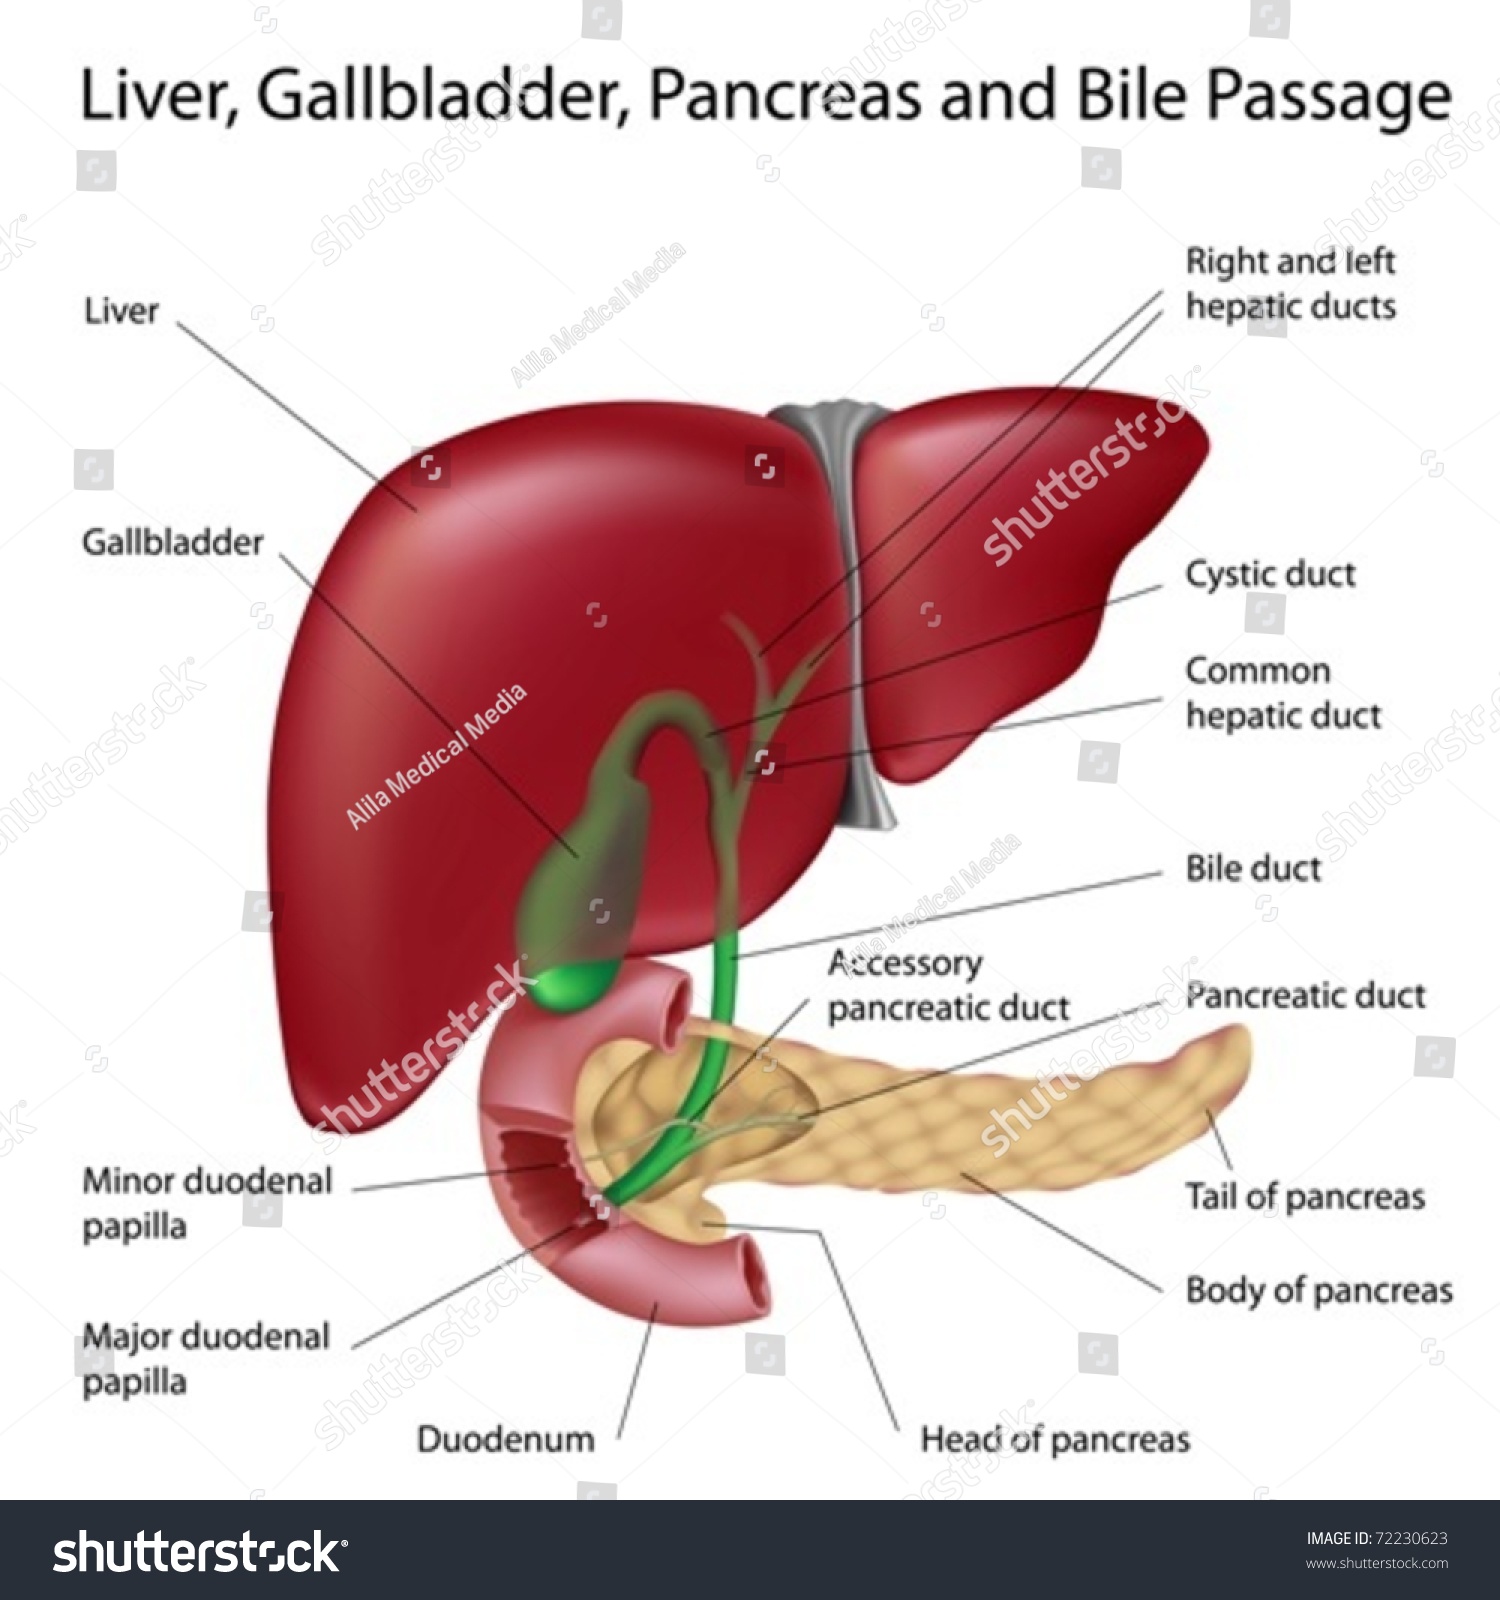 Liver Gallbladder Duodenum Pancreas Labeled Scientifically Stock Vector